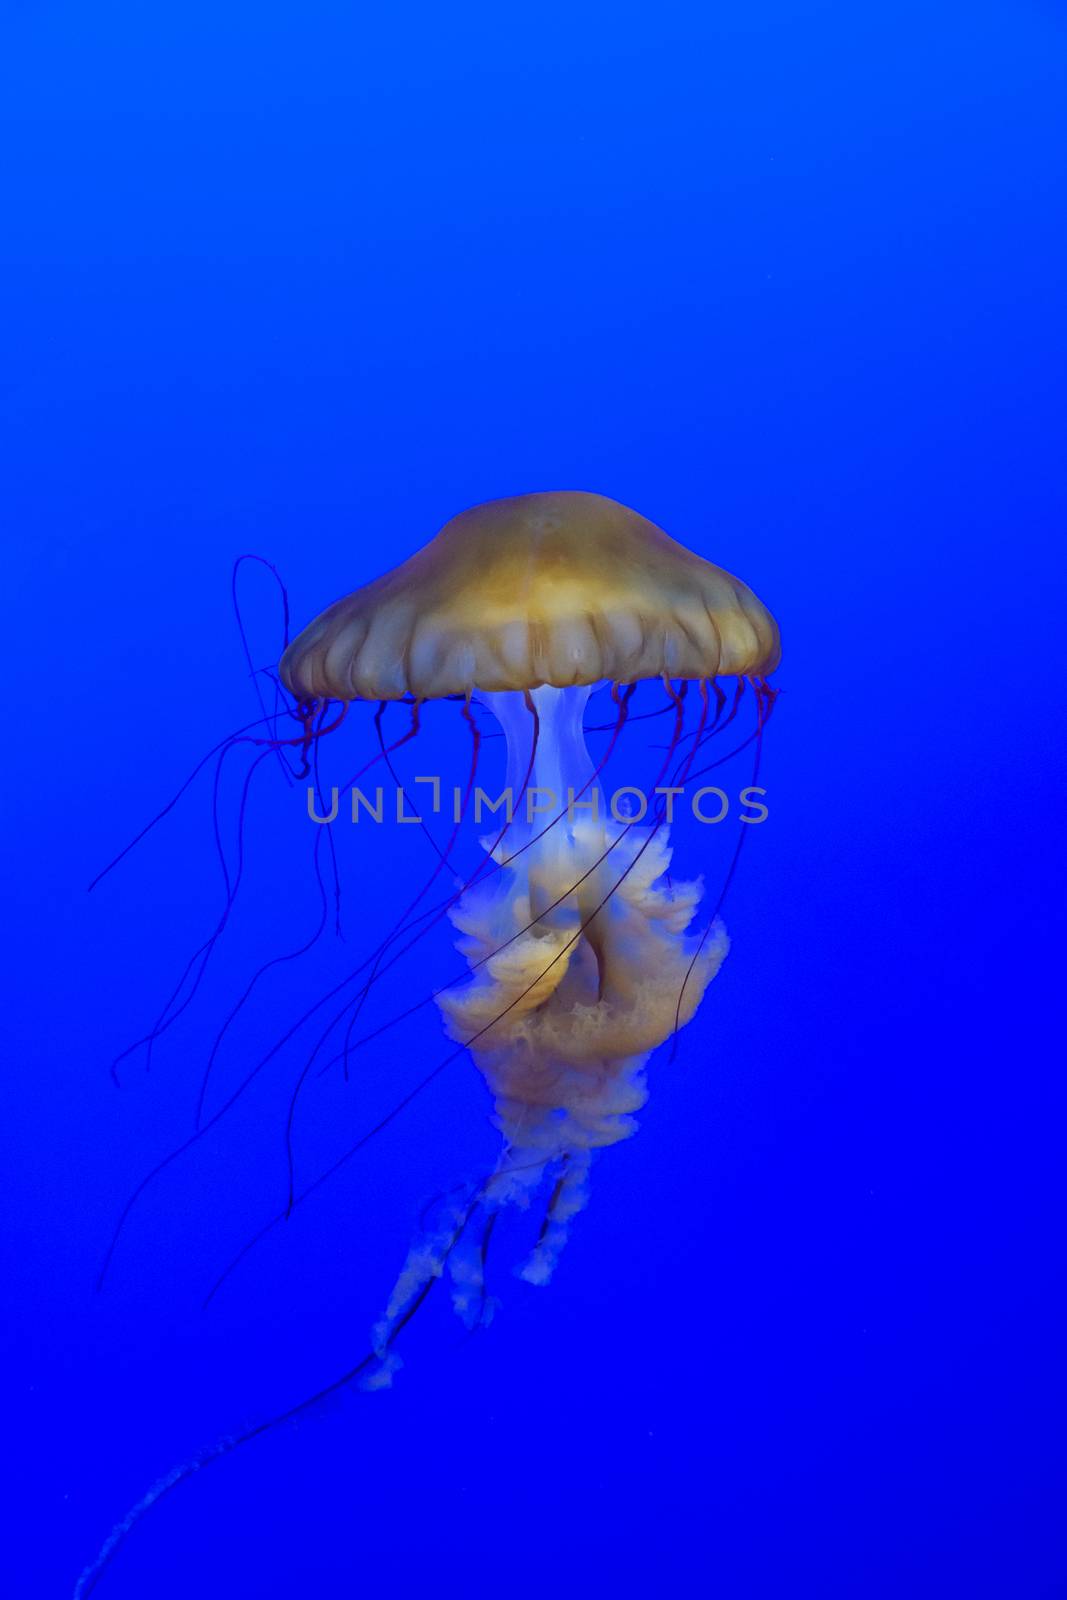 Sea Nettle, Chrysaora fuscescens, floating in the blue waters of Pacific Ocean.